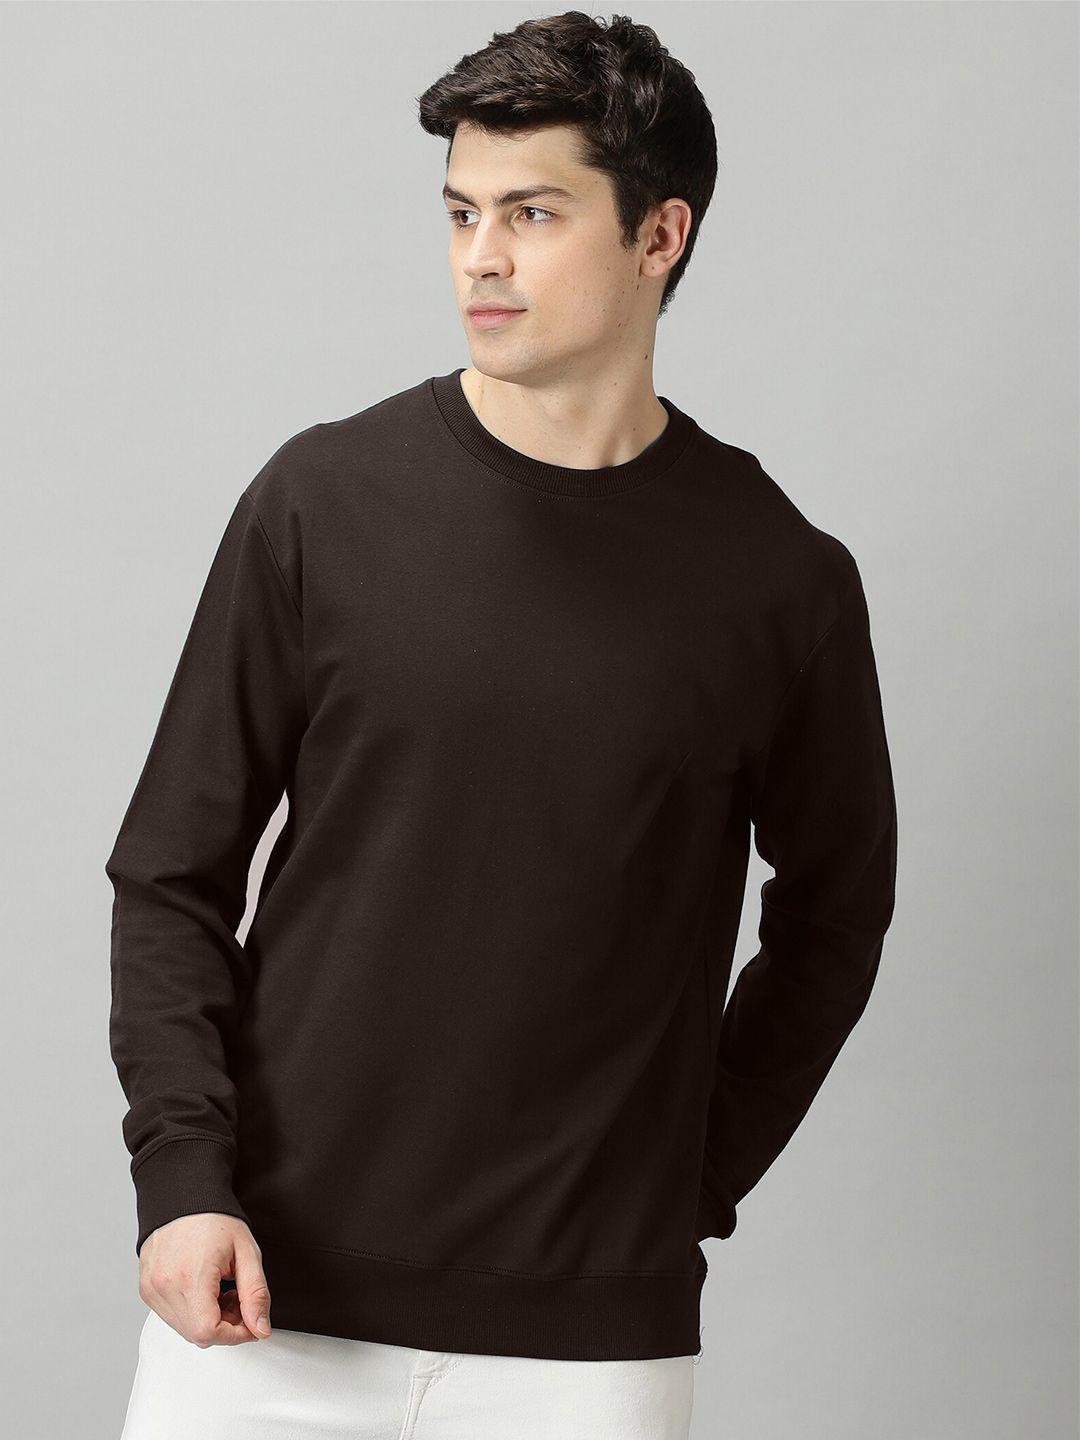 the hollander long sleeves cotton t-shirt